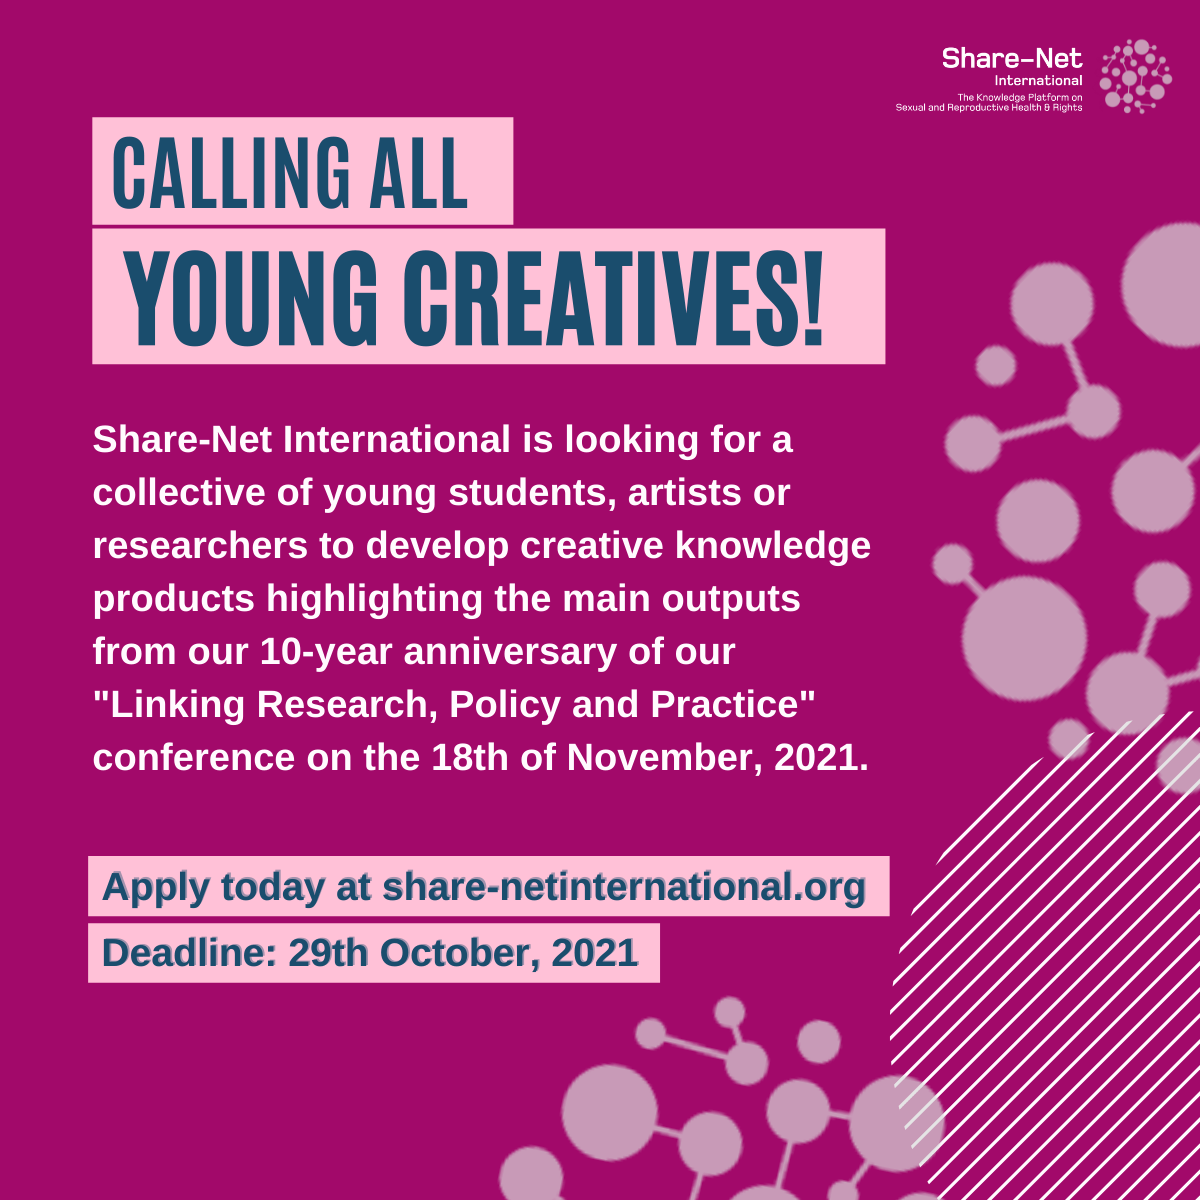 Call for Young Creatives for the LRPP Conference 2021!